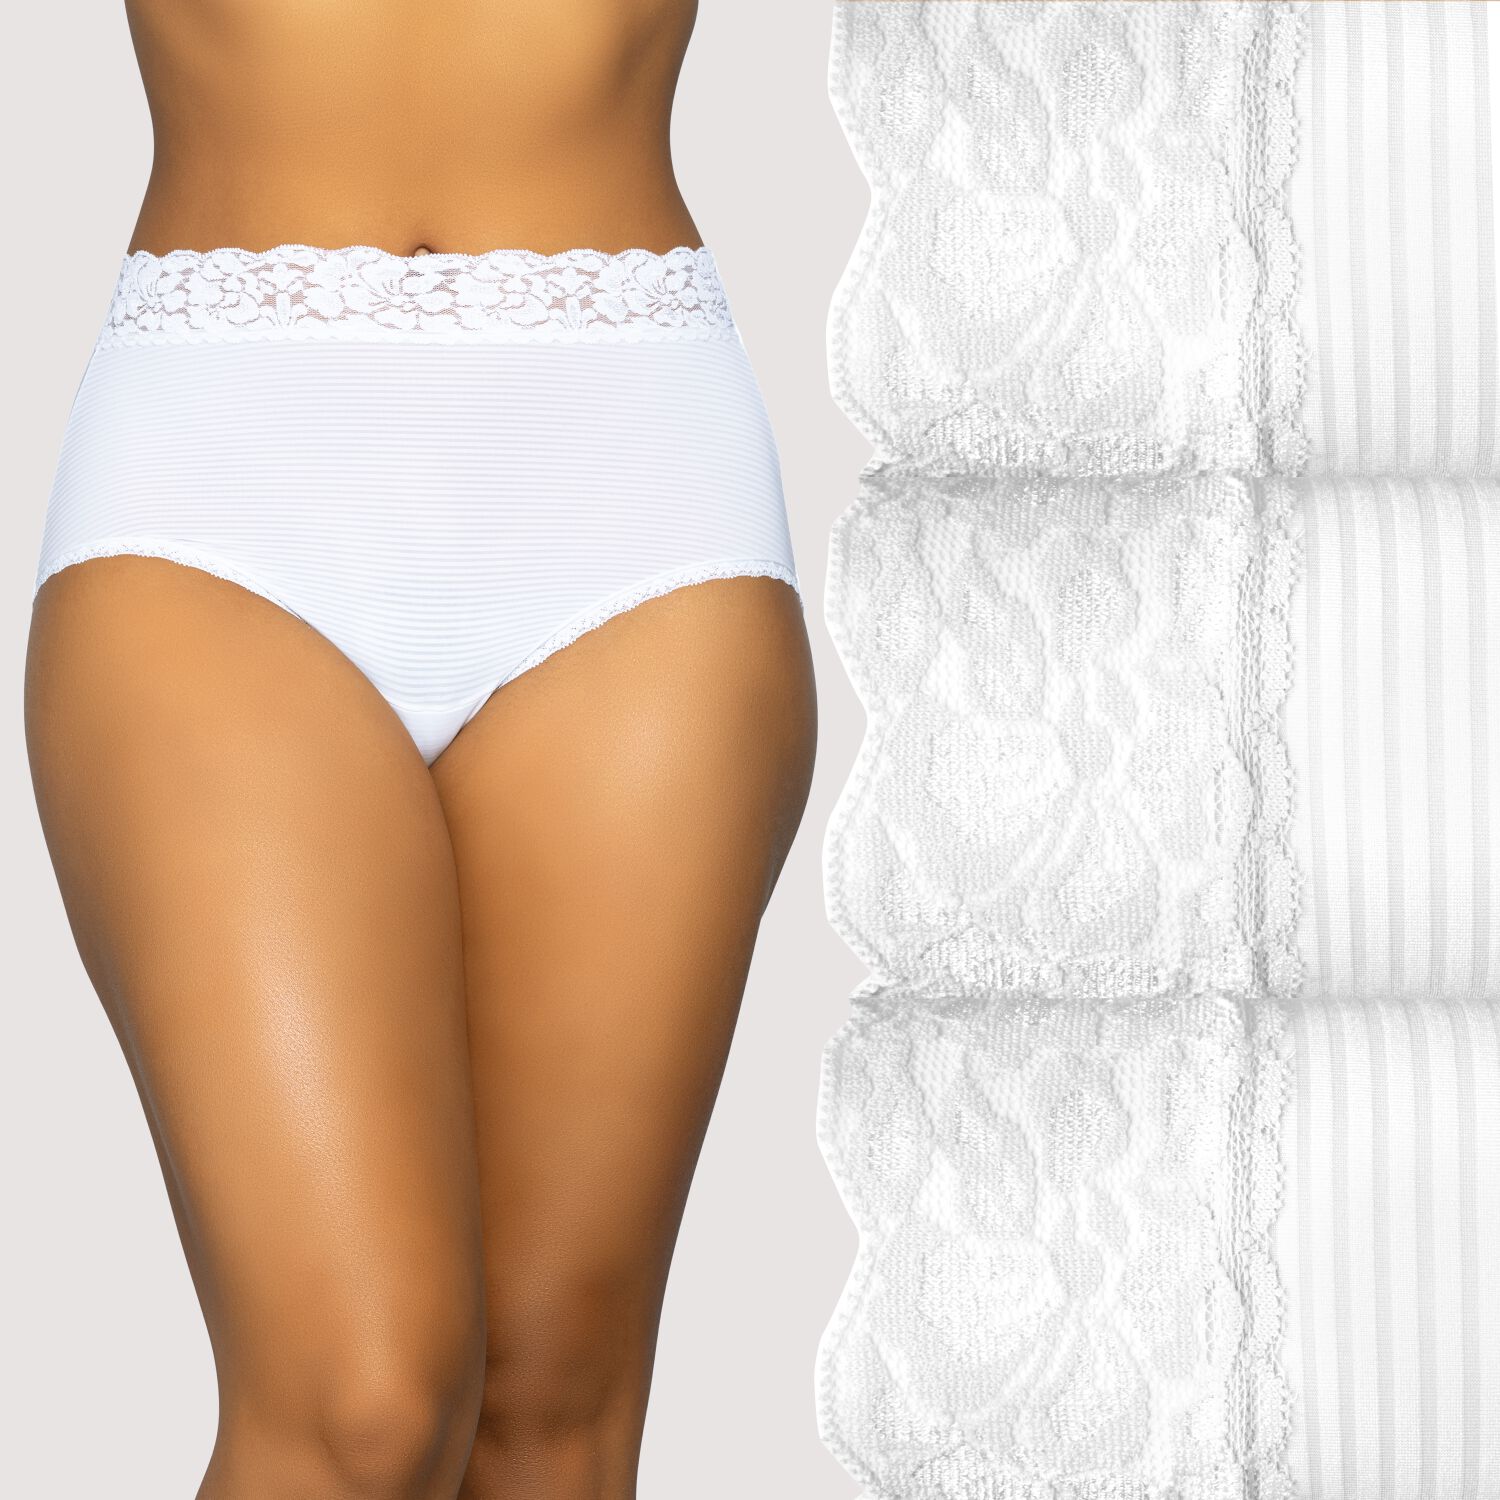 Flattering Lace® Brief, 3 Pack WHITE/WHITE/WHITE